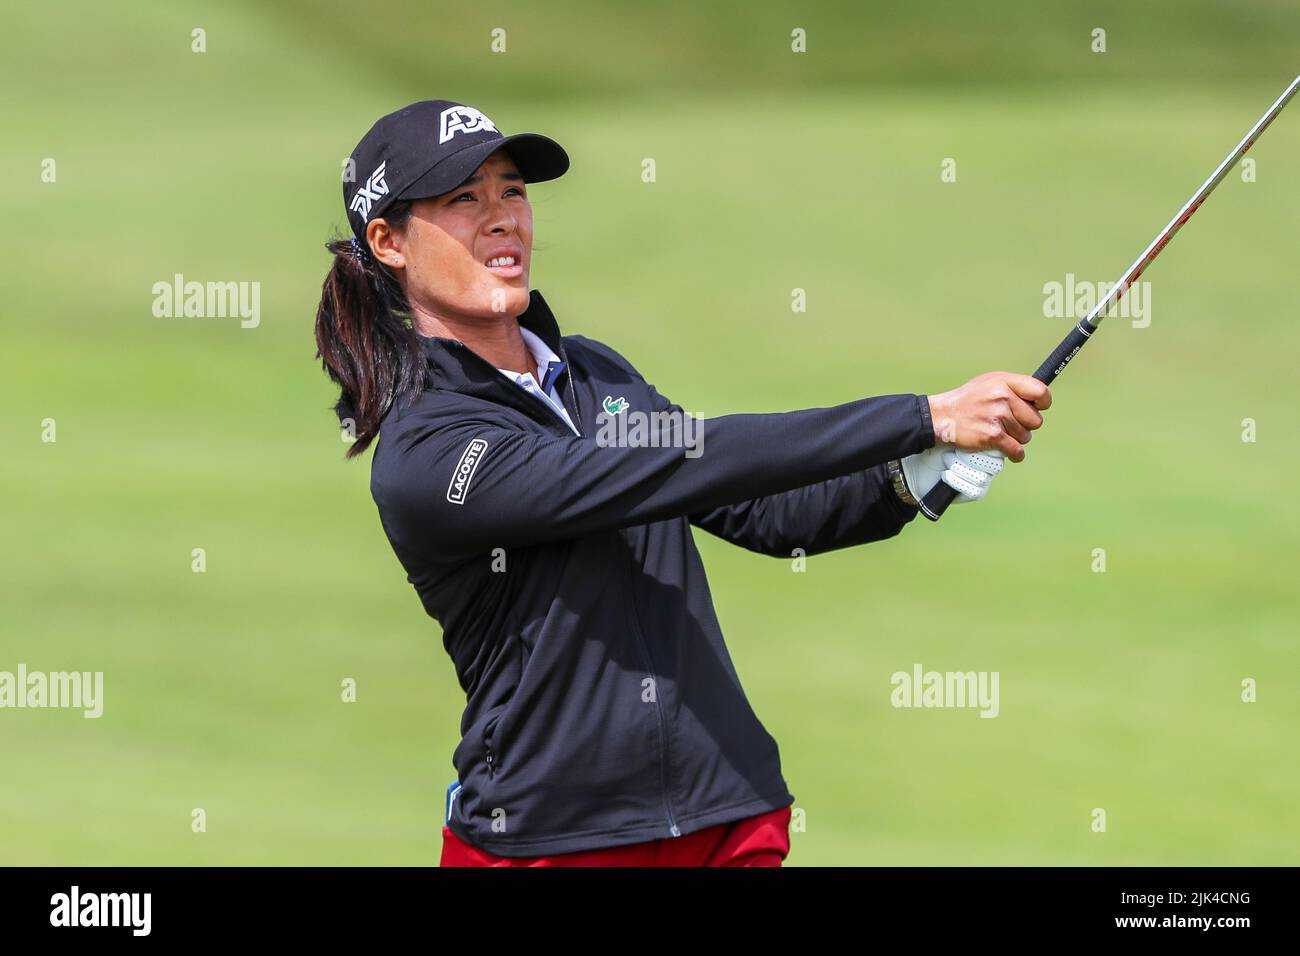 Irvine, UK. 30th July, 2022. The third round of the Trust Golf Women's Scottish Golf took place with 75 players making the cut. Heavy overnight rain from Friday into Saturday made for a softer and more testing course. Celine Boutier playing her second shot on the 10th fairway. Credit: Findlay/Alamy Live News Stock Photo